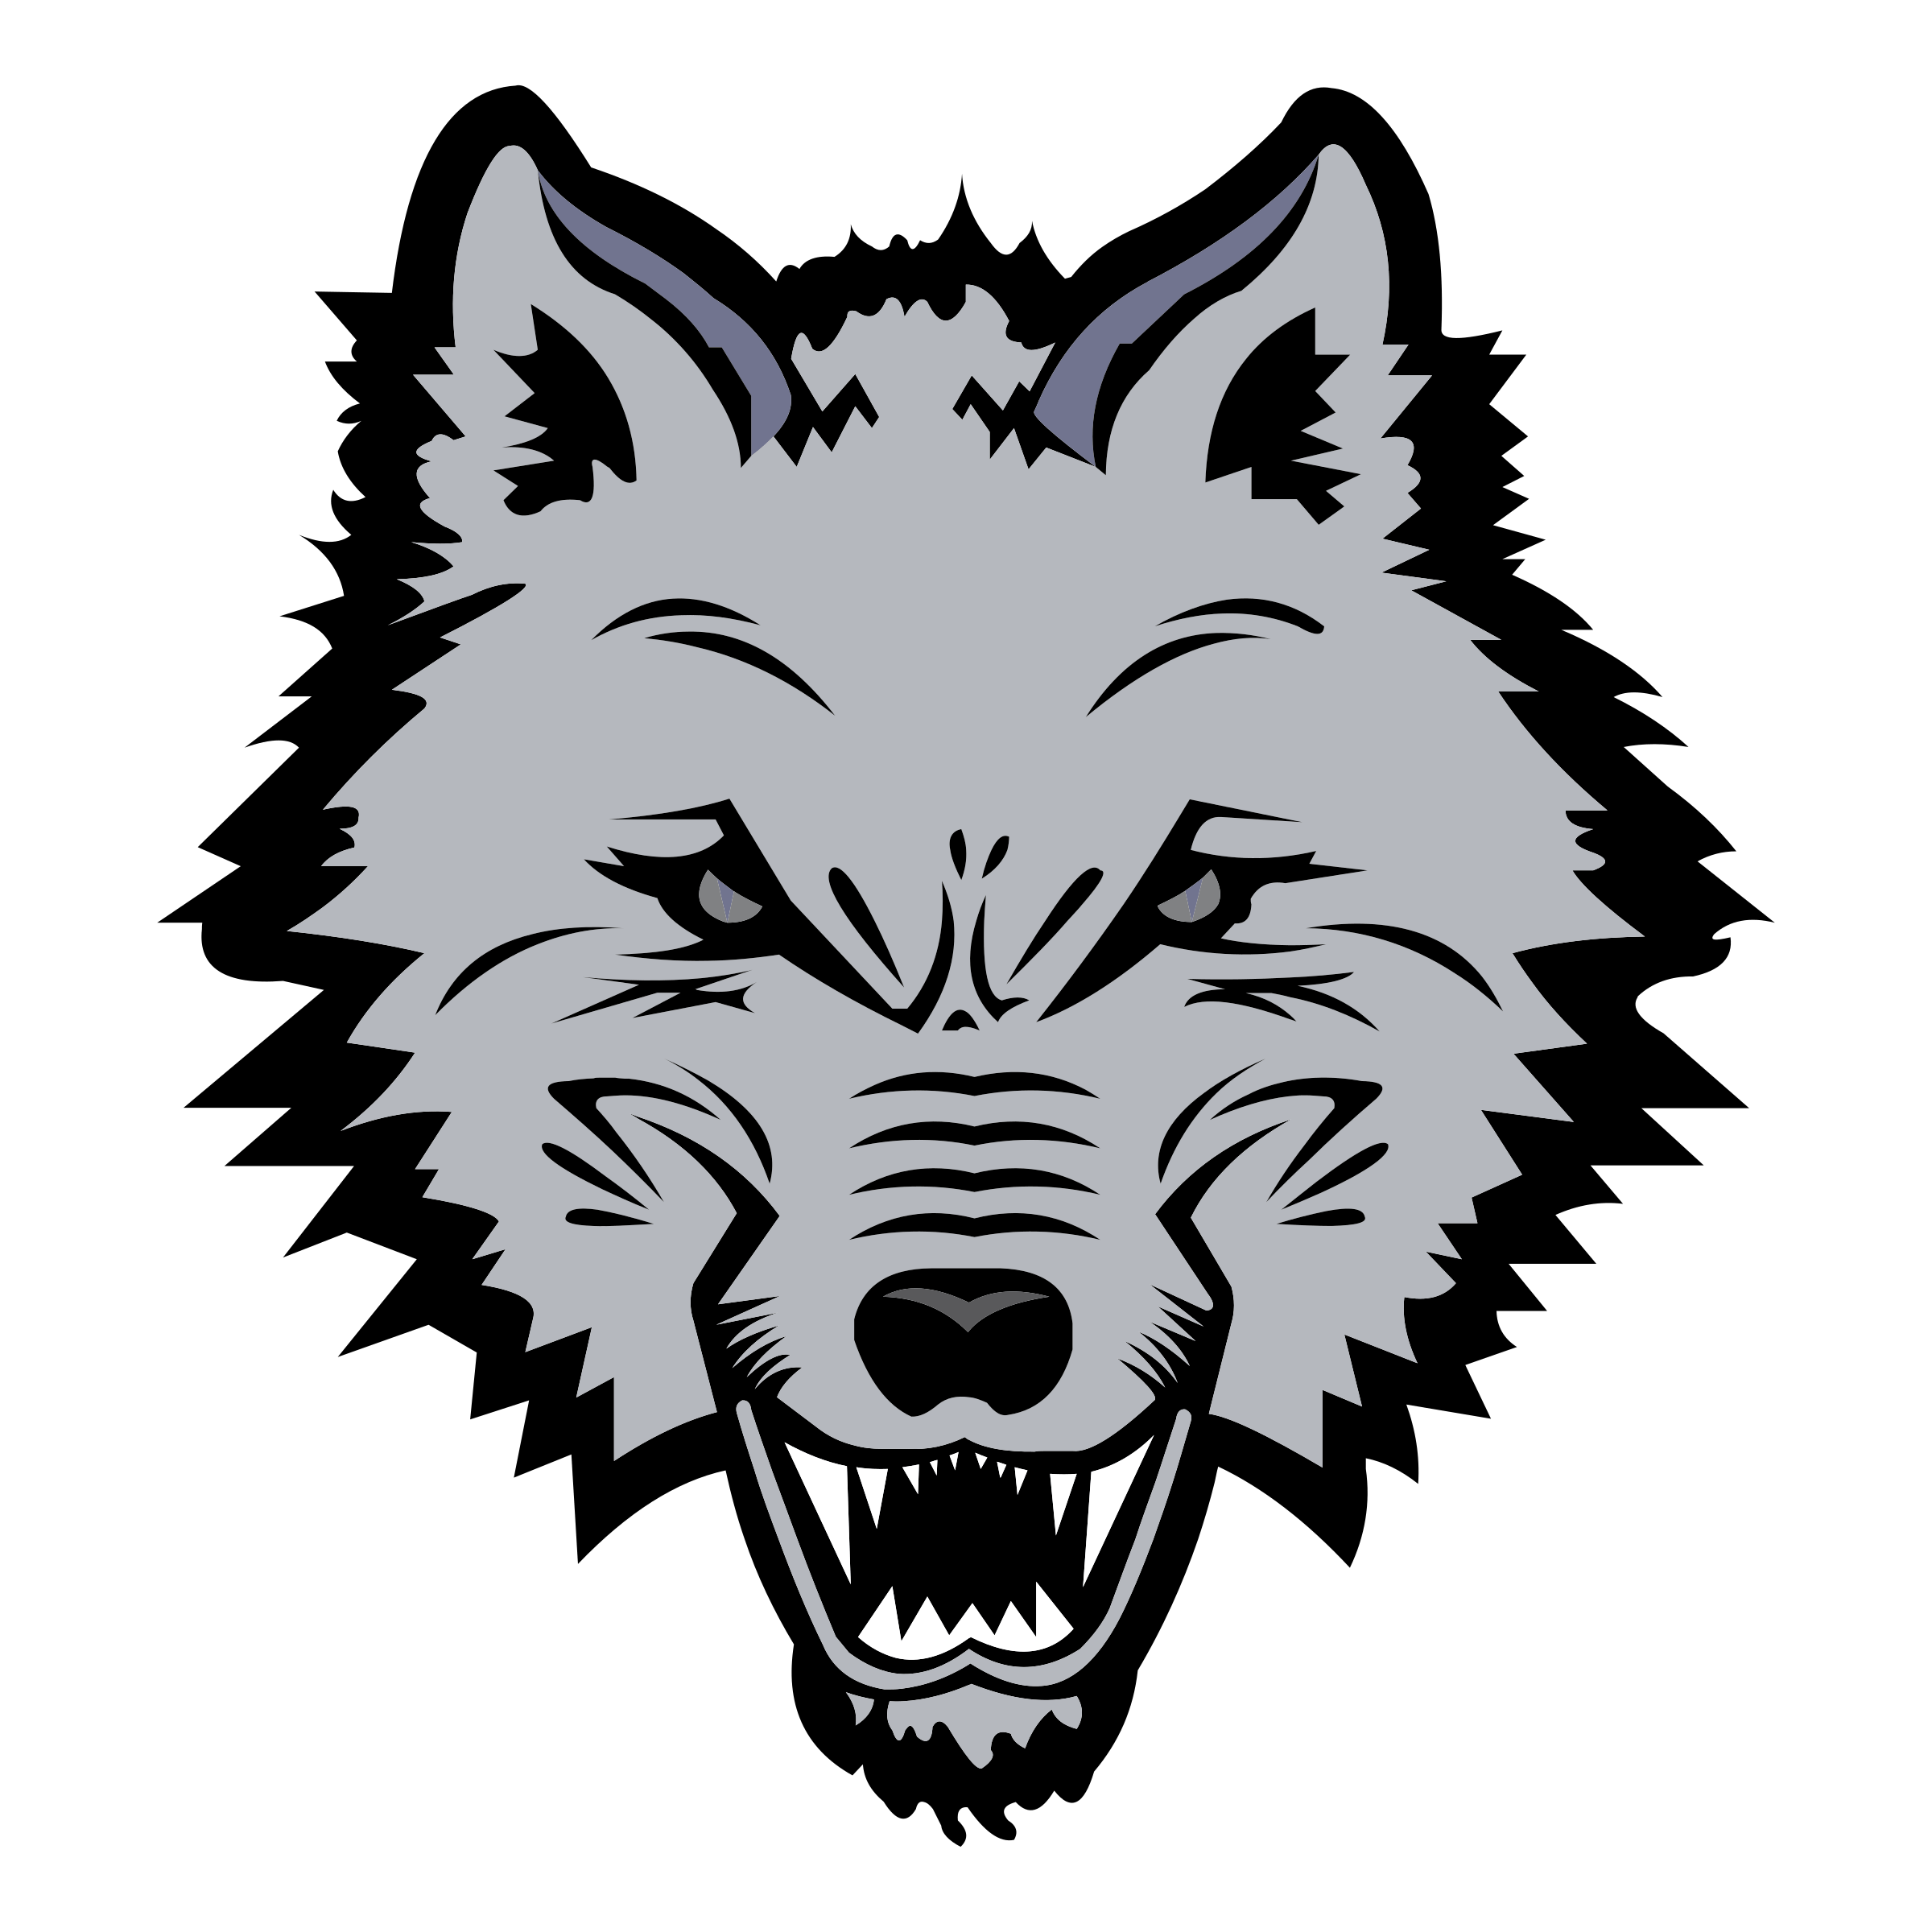 Black and White Wolves Logo - New England Sea Wolves Logo PNG Transparent & SVG Vector - Freebie ...